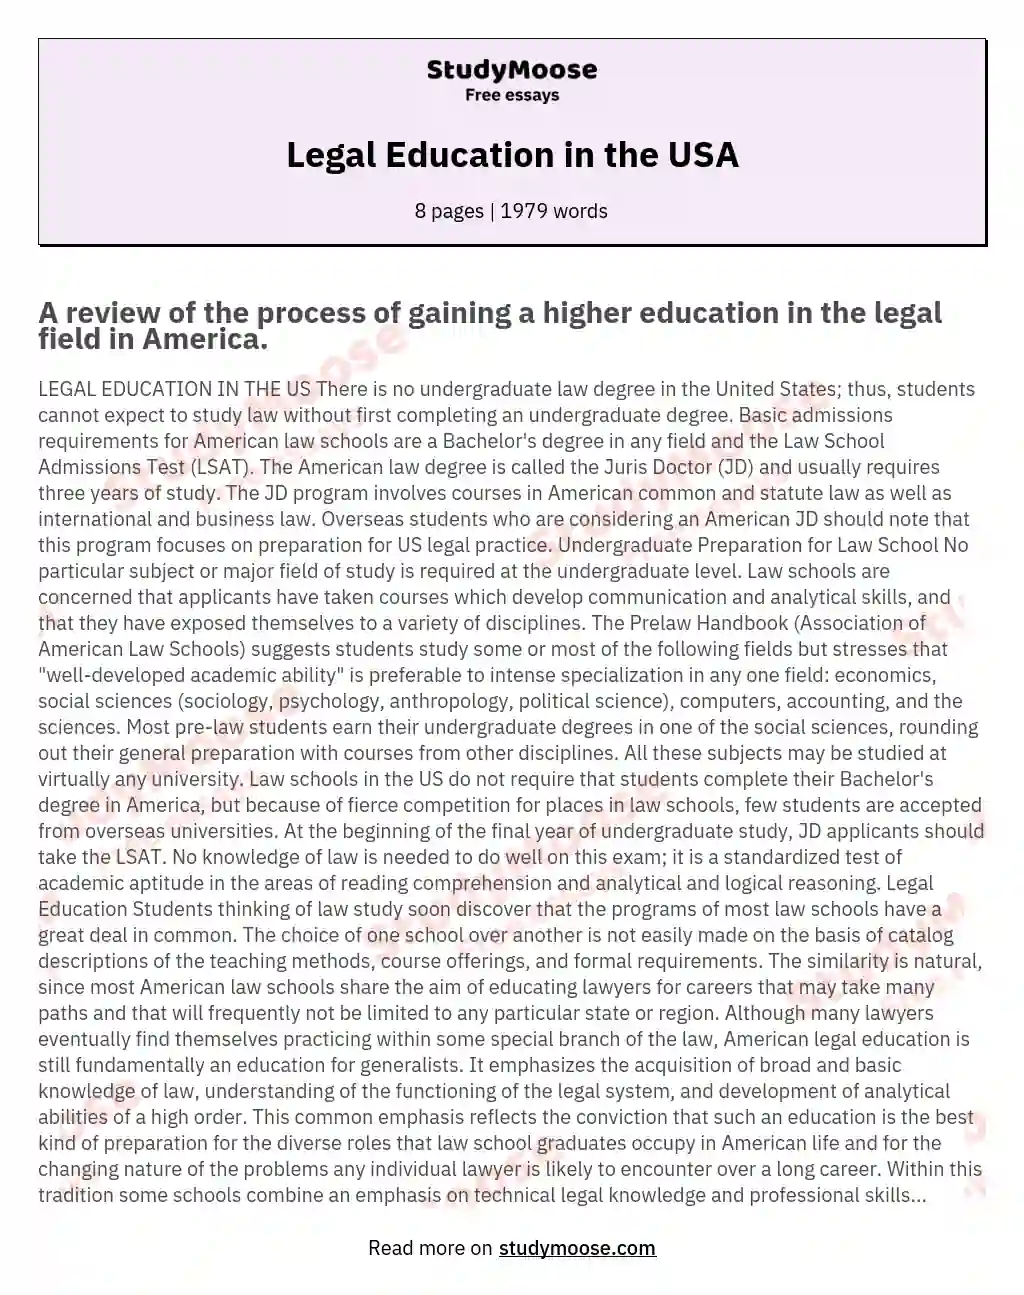 Legal Education in the USA